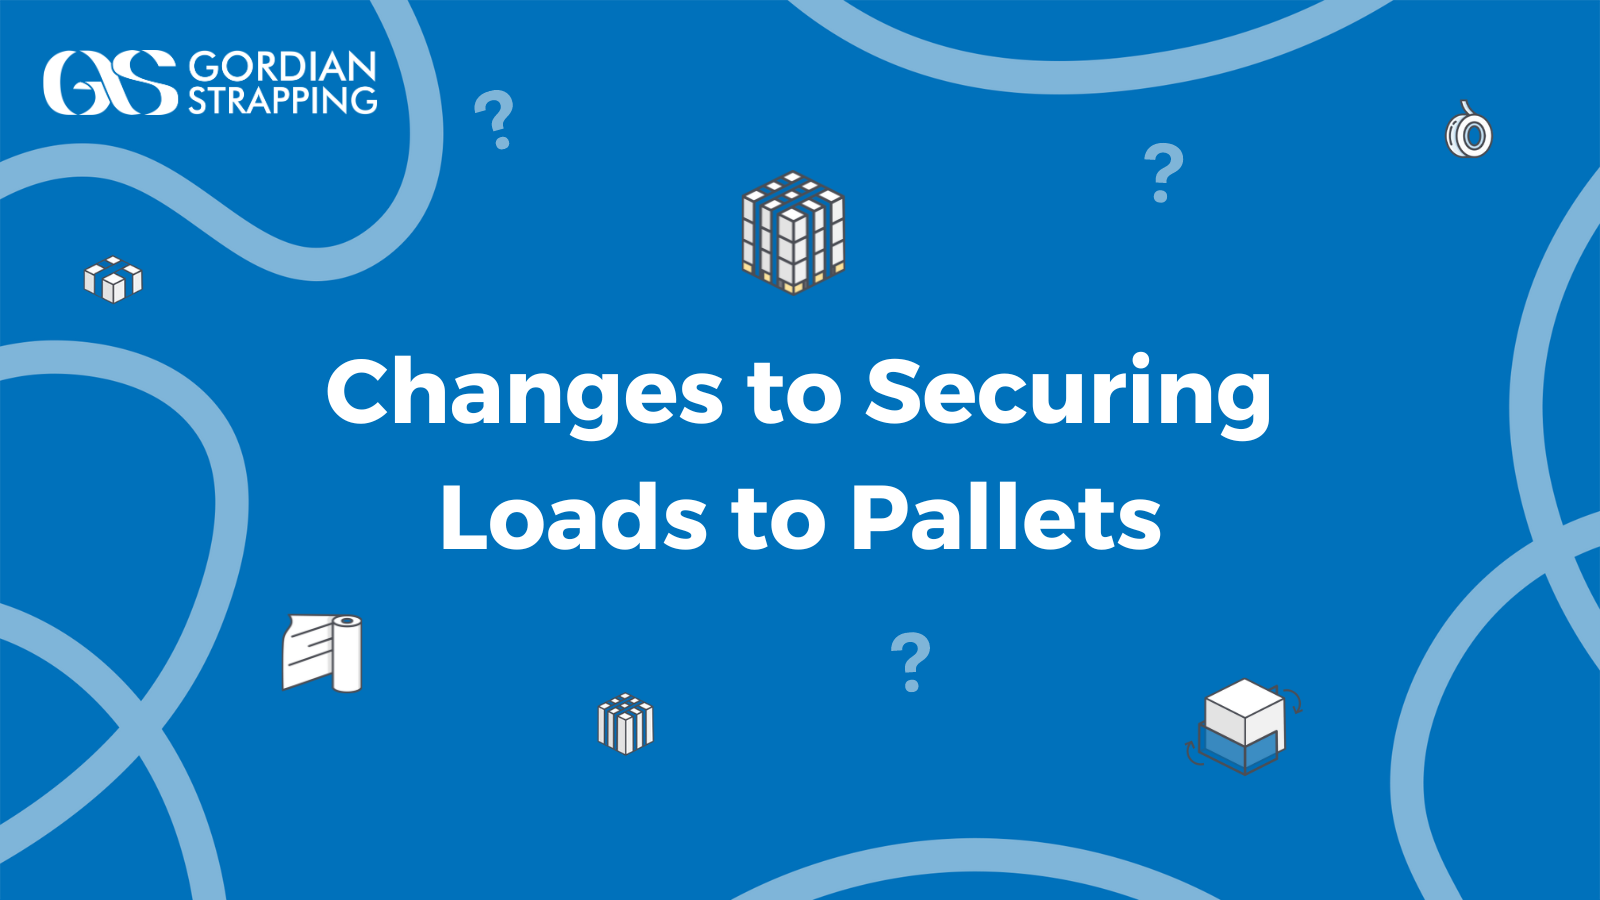 Pallet Safety: Changes to Securing Loads to Pallets